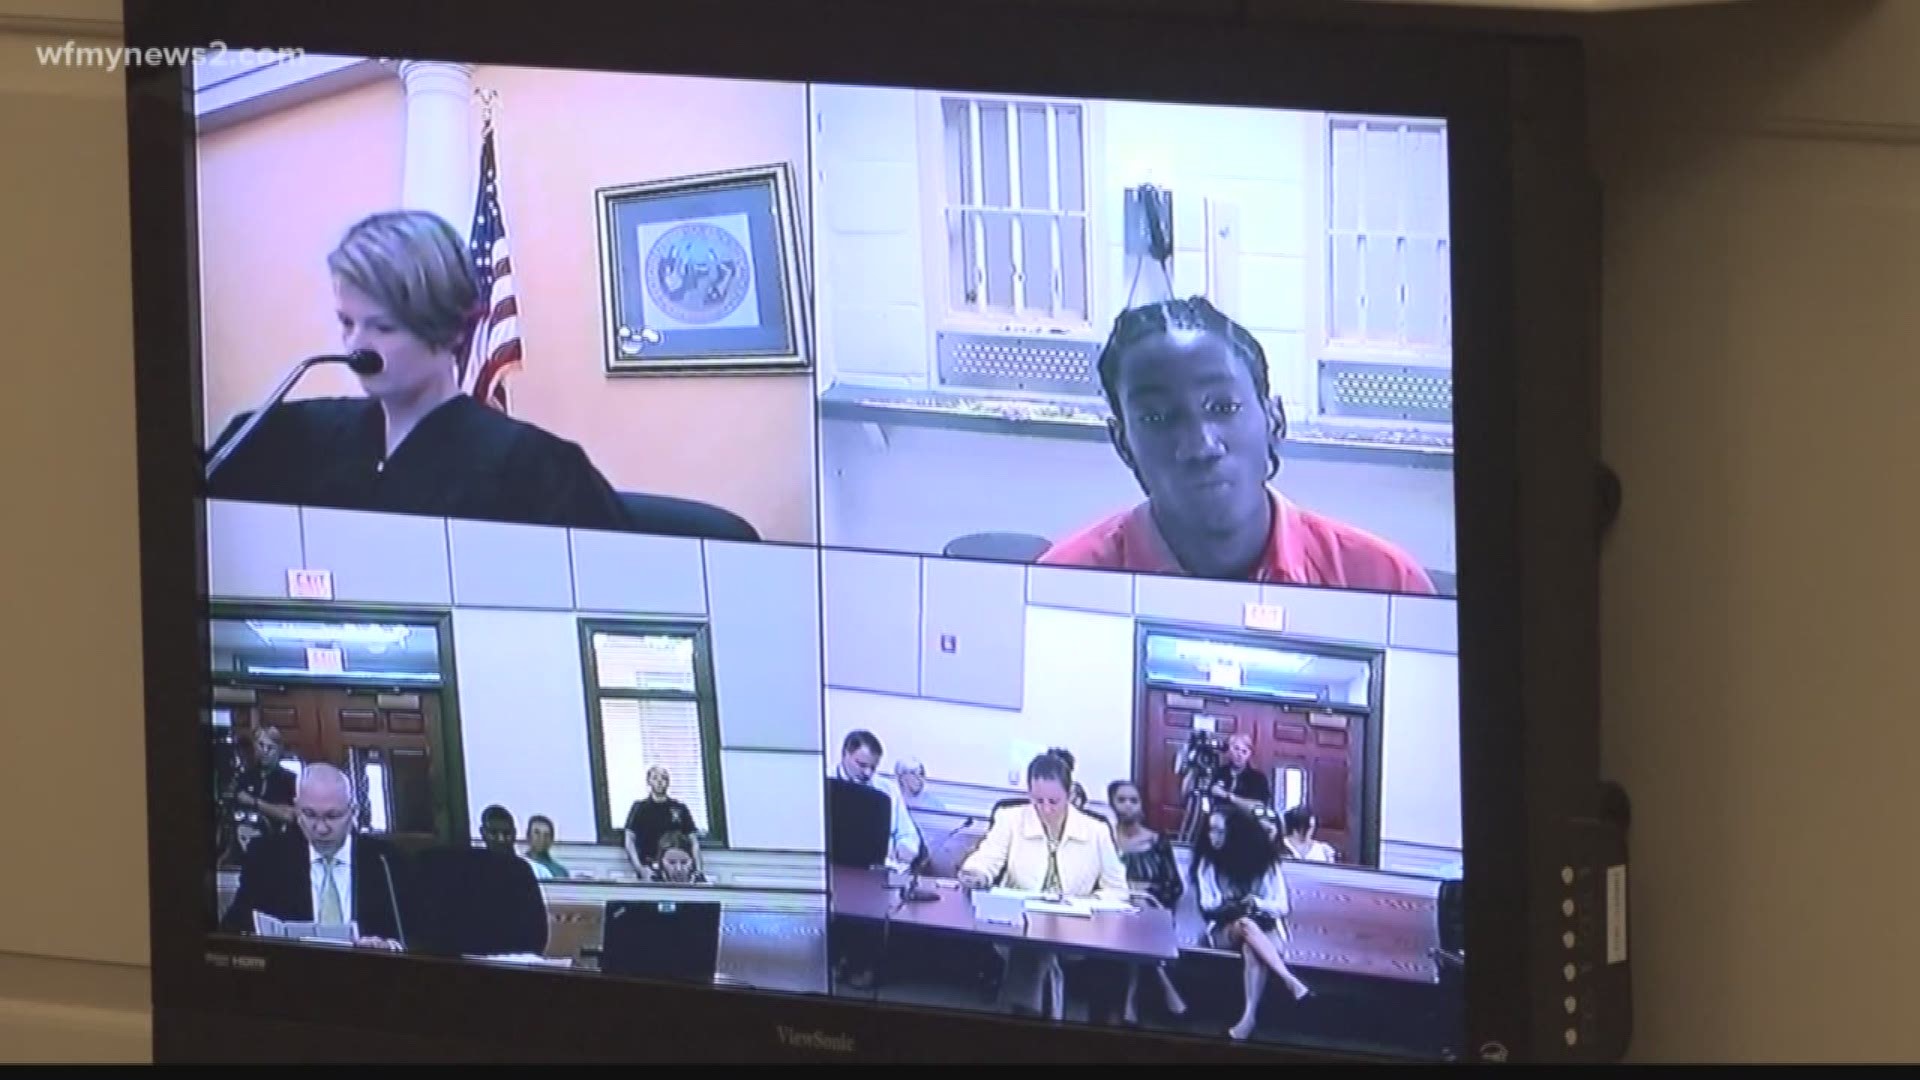 An Orange County judge increased Jataveon Hall's Bond to $175,000. The District Attorney said after the events of this weekend. Hall left UNC hospital even after staff told him it wasn't safe to do so.